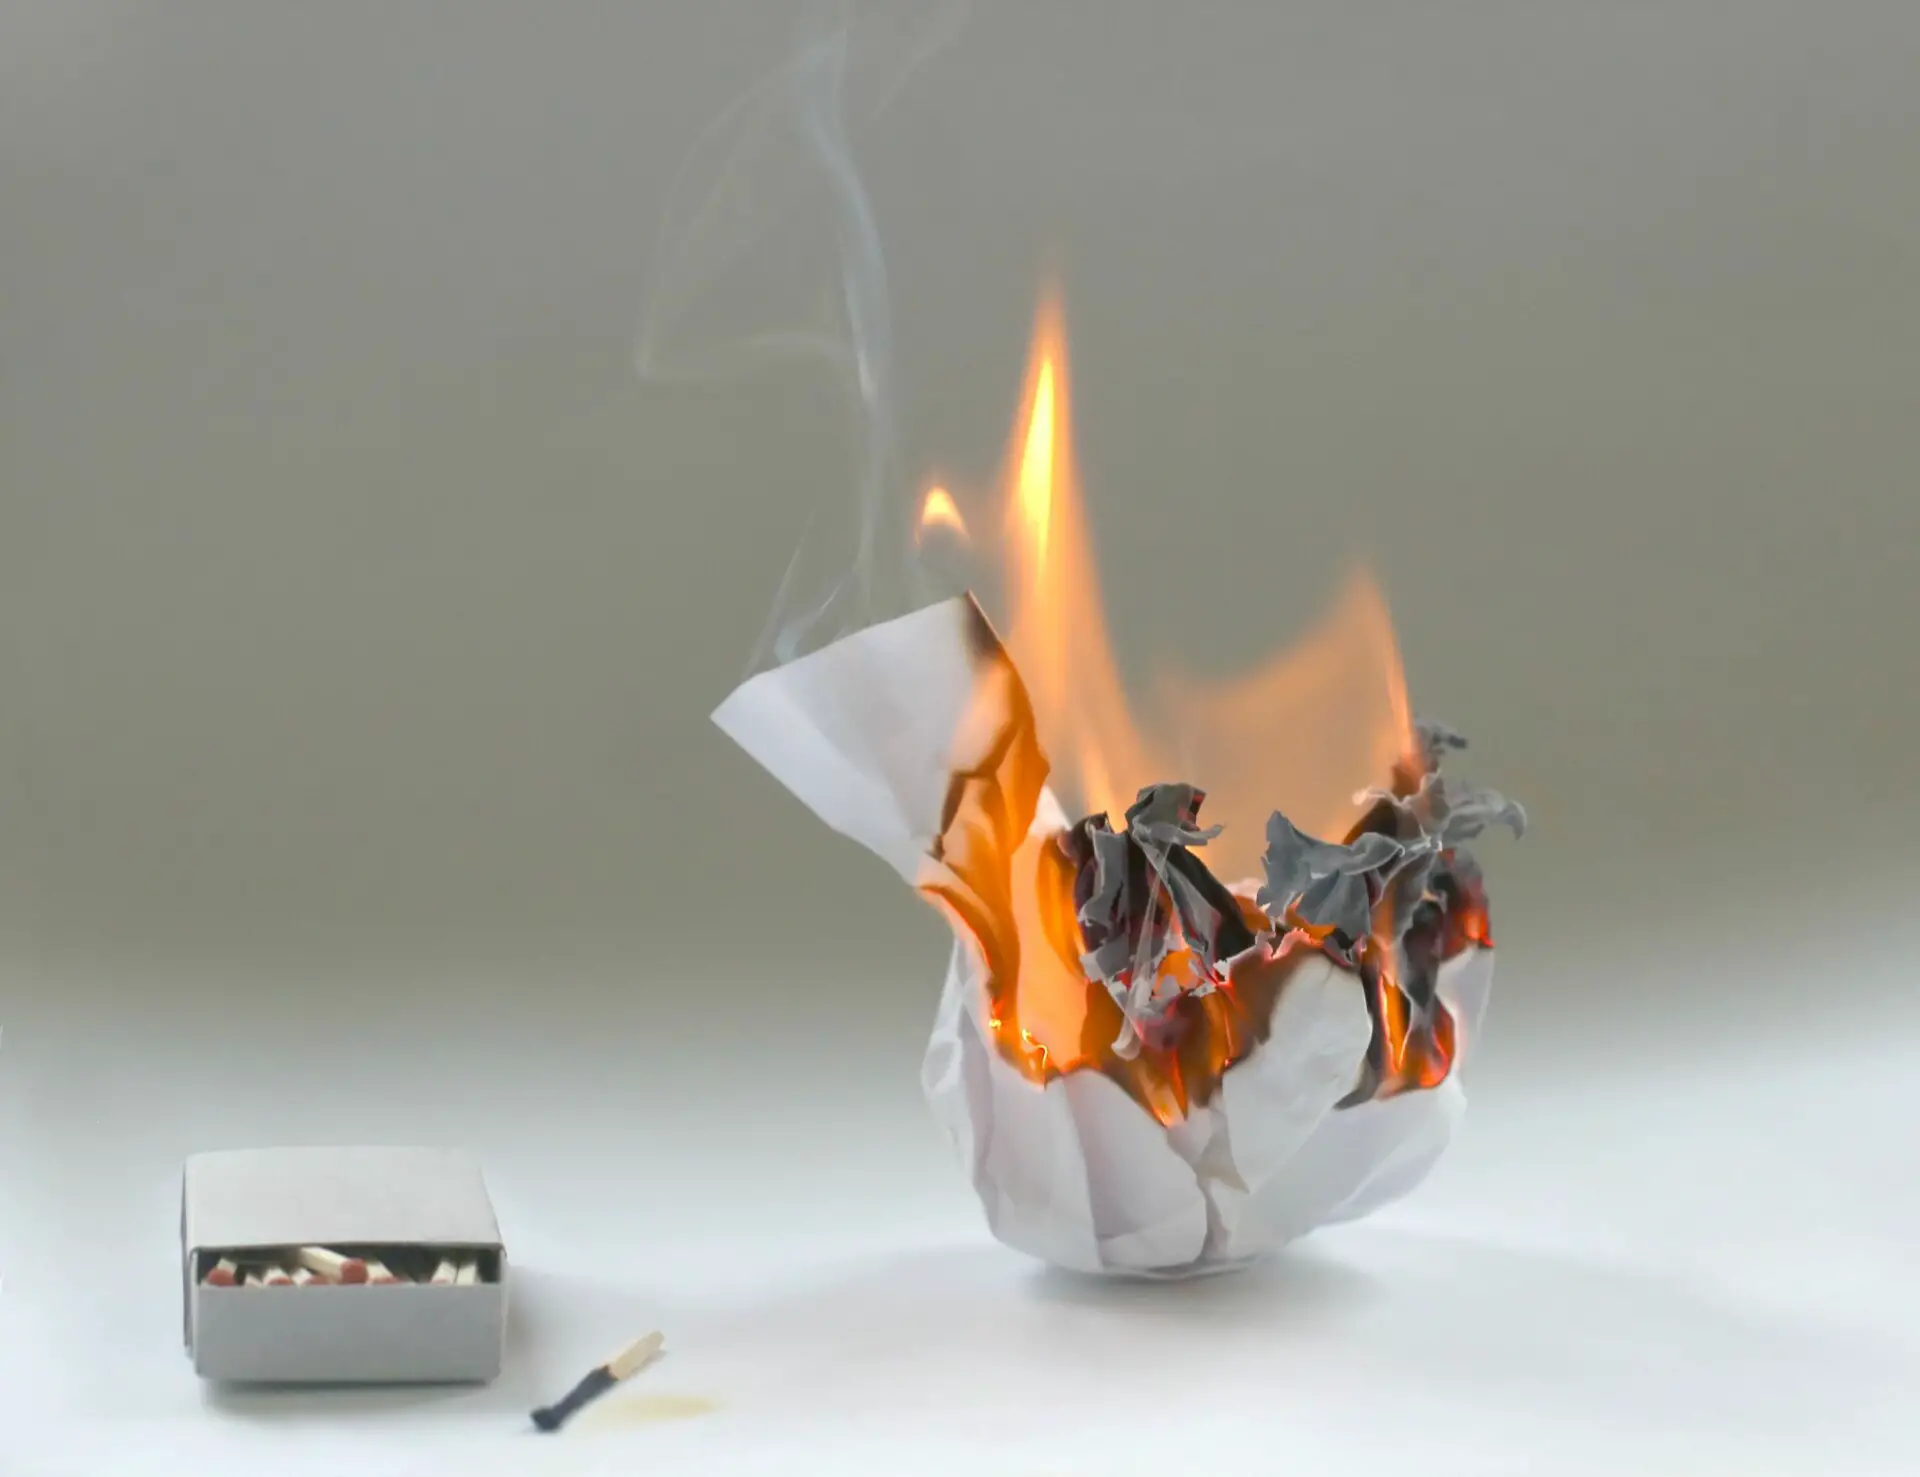 Is Burning Paper Bad for the Environment? (6 Surprising Facts)